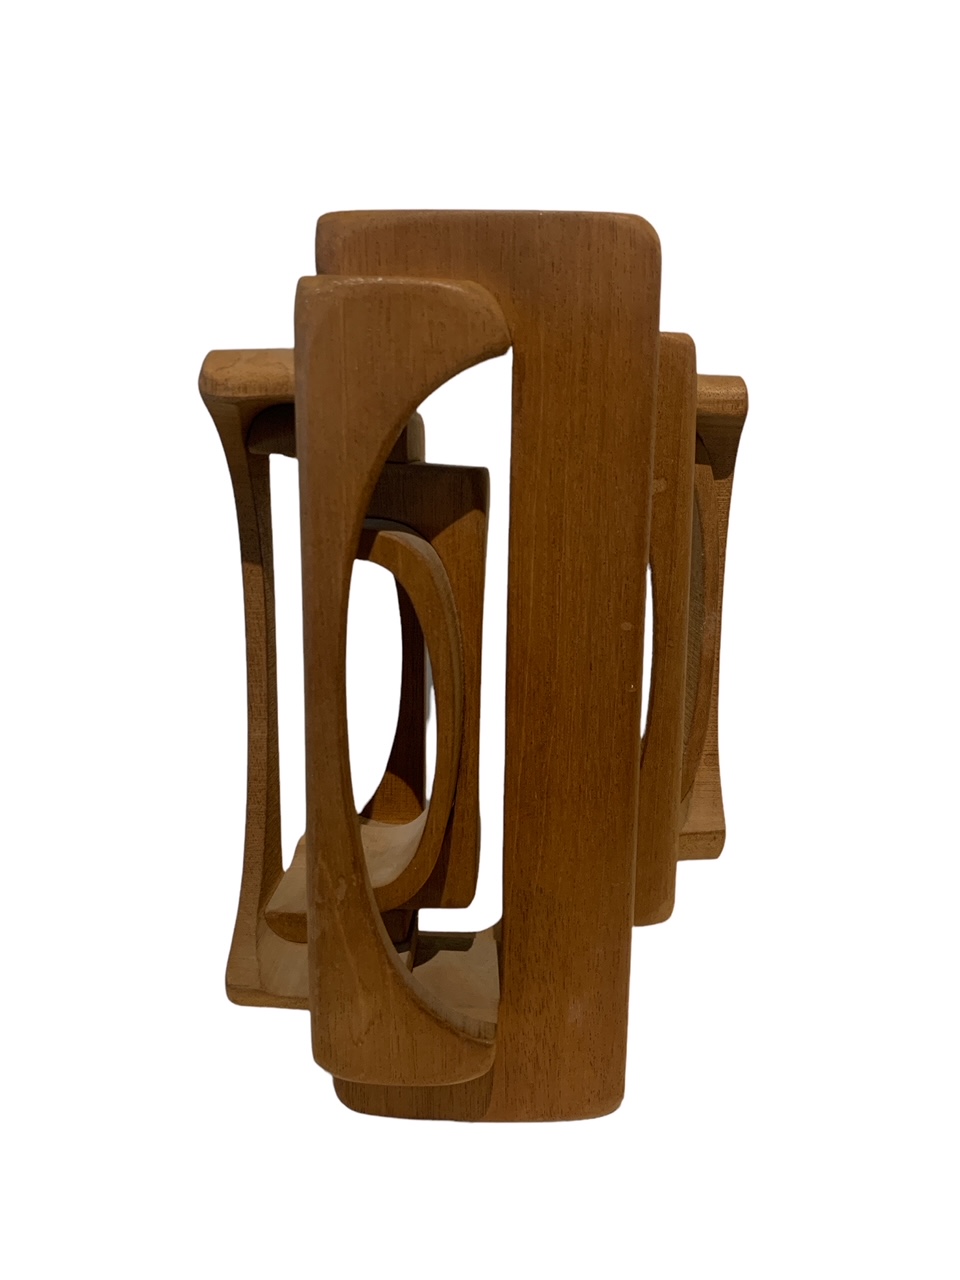 BRIAN WILLSHER, BRITISH, 1930 - 2010, A 20TH CENTURY CARVED WOOD ABSTRACT SCULPTURE Articulated - Image 3 of 5